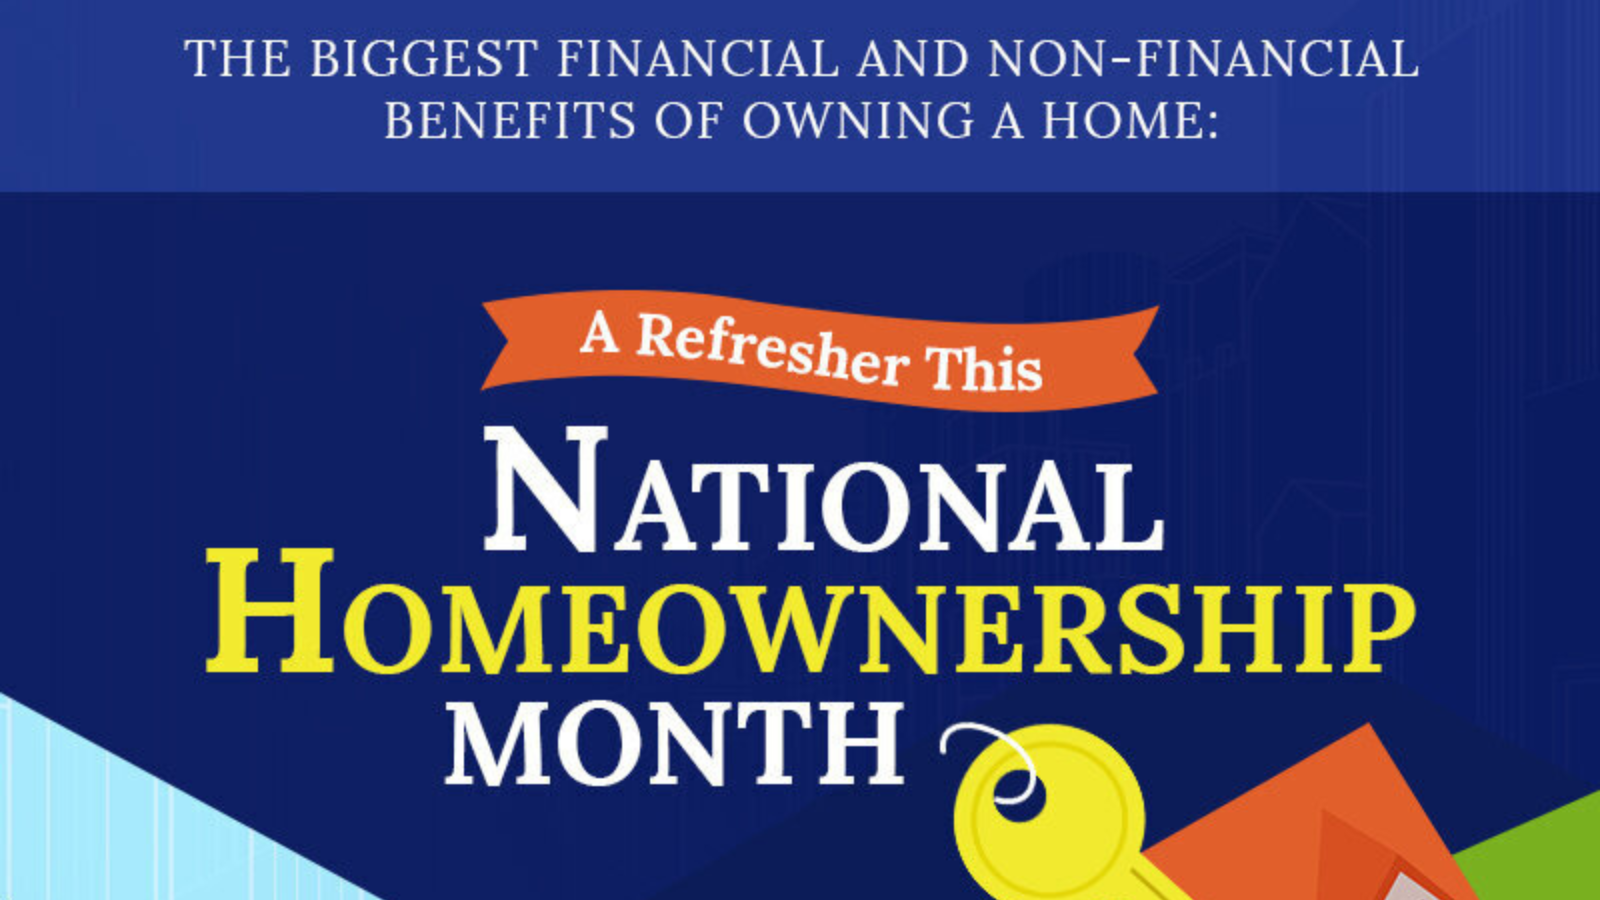 The Biggest Financial and Non-Financial Benefits of Owning A Home: A Refresher During This National Homeownership Month